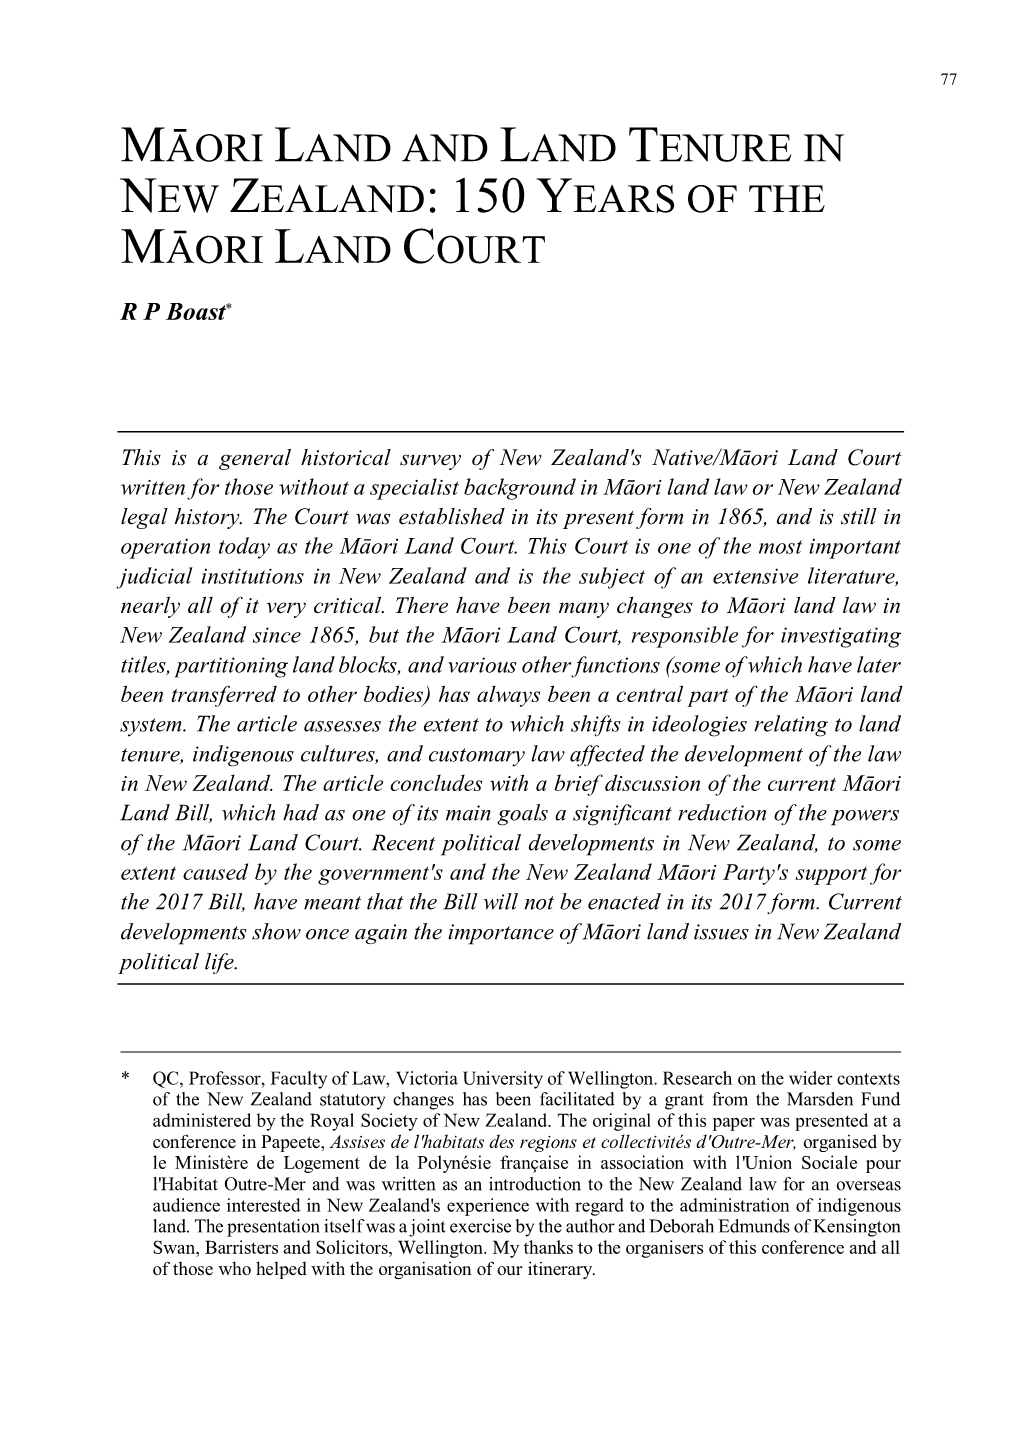 Māori Land and Land Tenure in New Zealand: 150 Years of the Māori Land Court